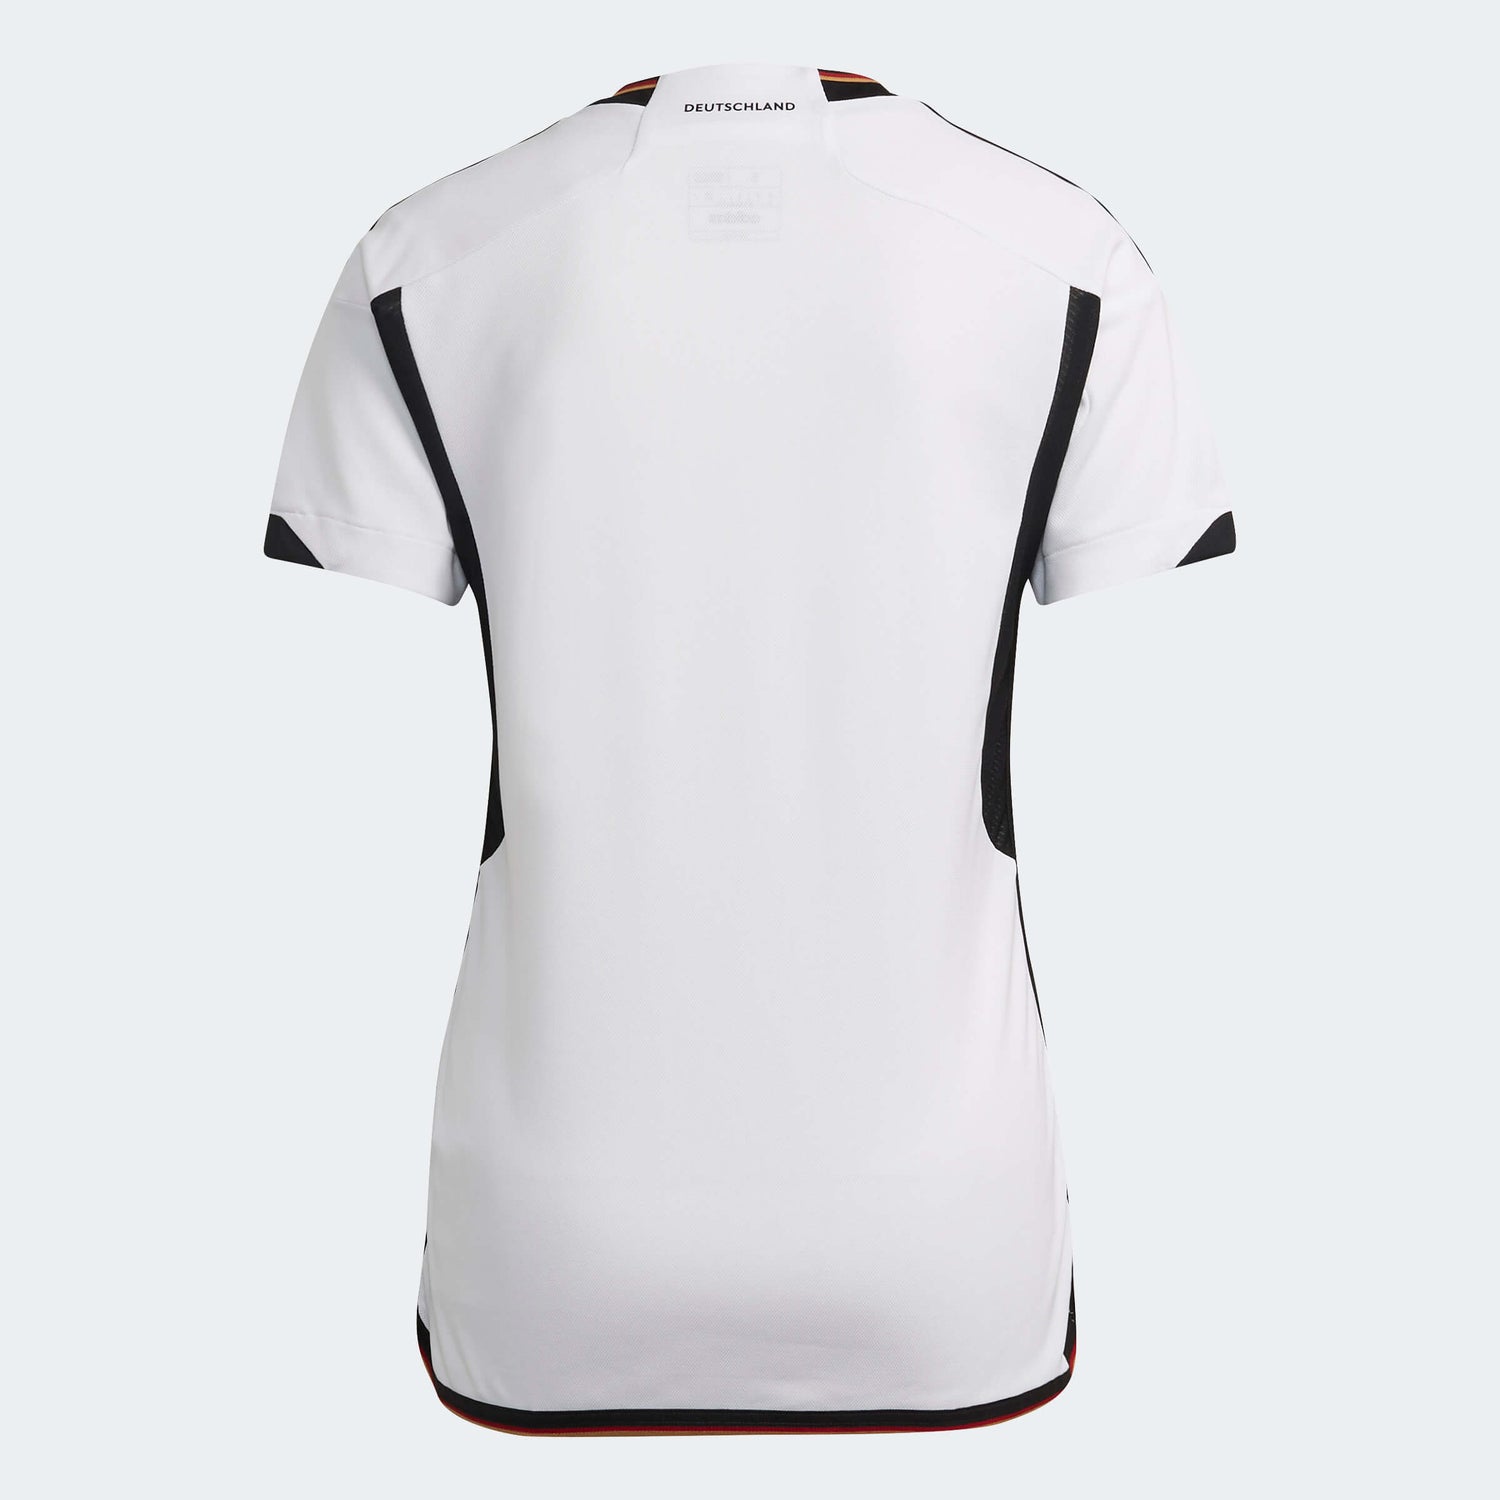 Adidas 2022-23 Germany Womens Home Jersey White-Black (Back)